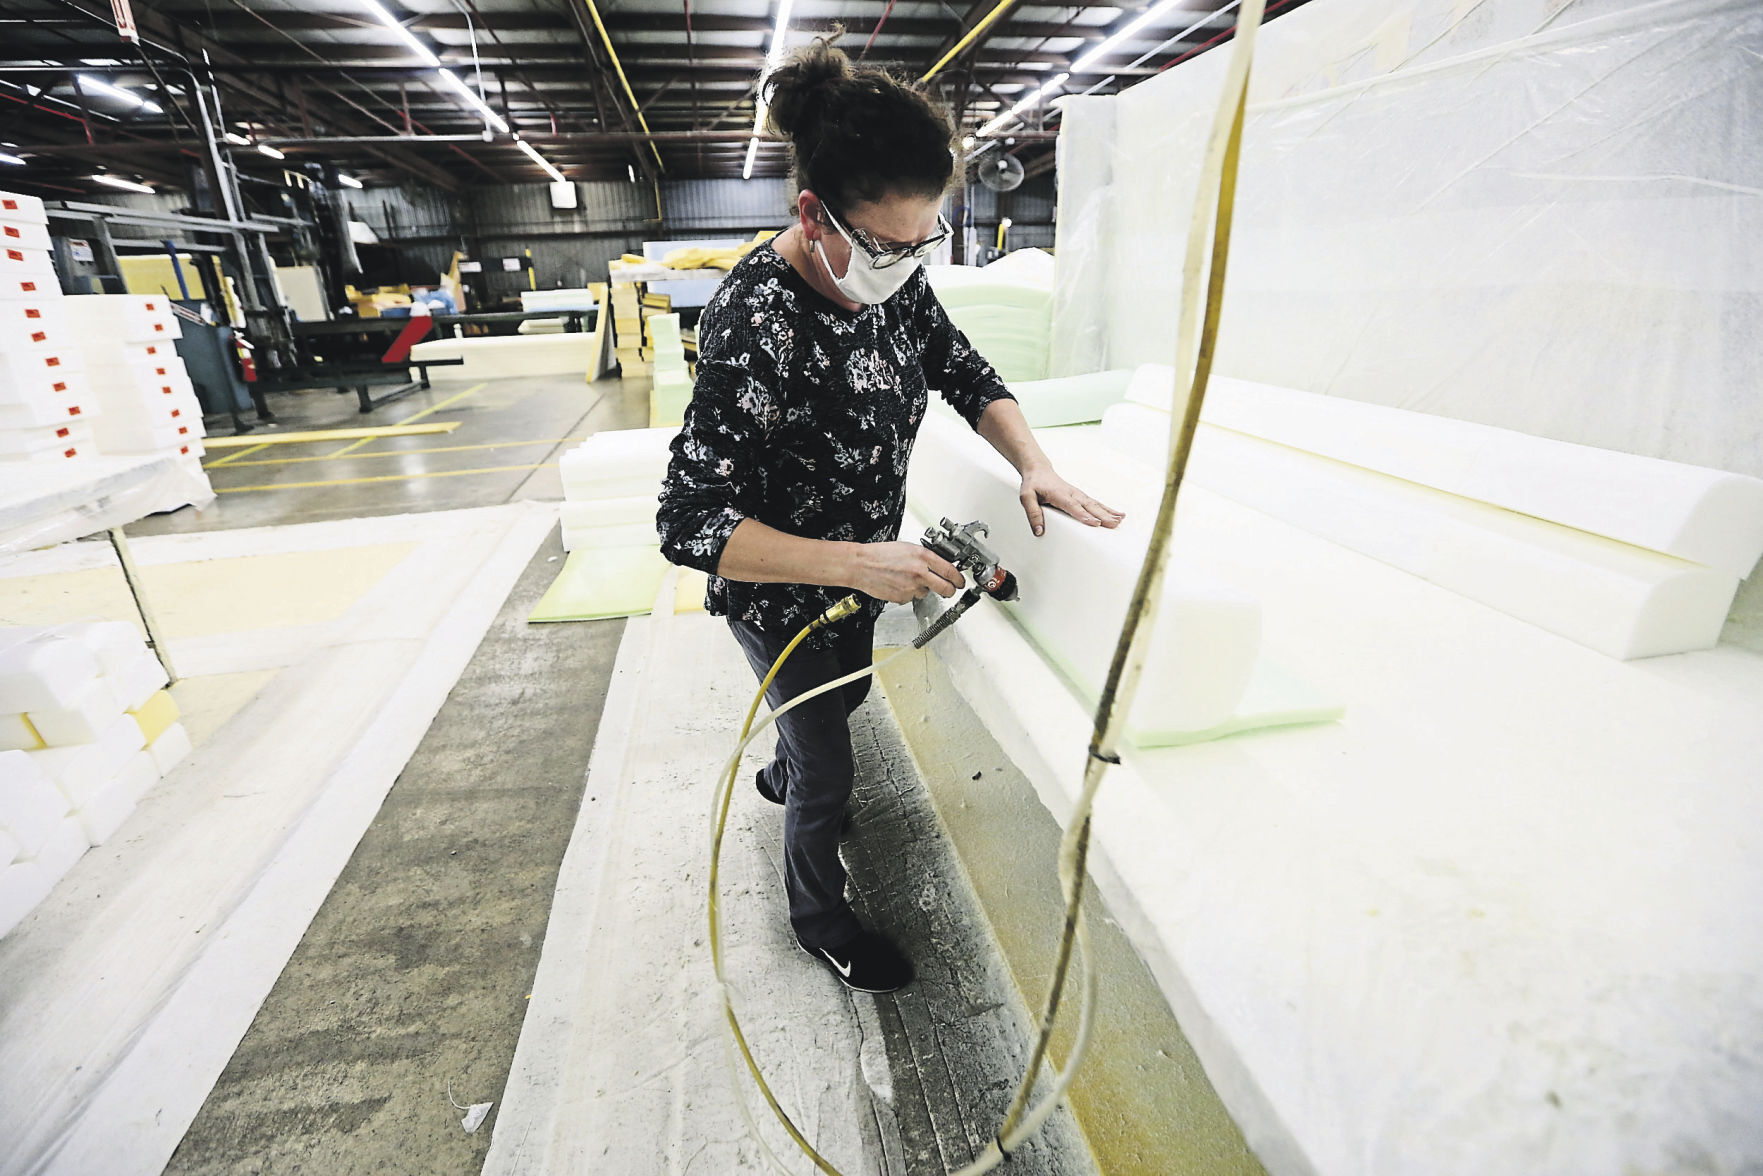 Zehida Covic assembles product at FXI. The manufacturing facility in Dubuque has shown growth since falling on some difficult times. FXI has adjusted and expanded its footprint to become one of the top polyurethane foam makers in North America. PHOTO CREDIT: NICKI KOHL